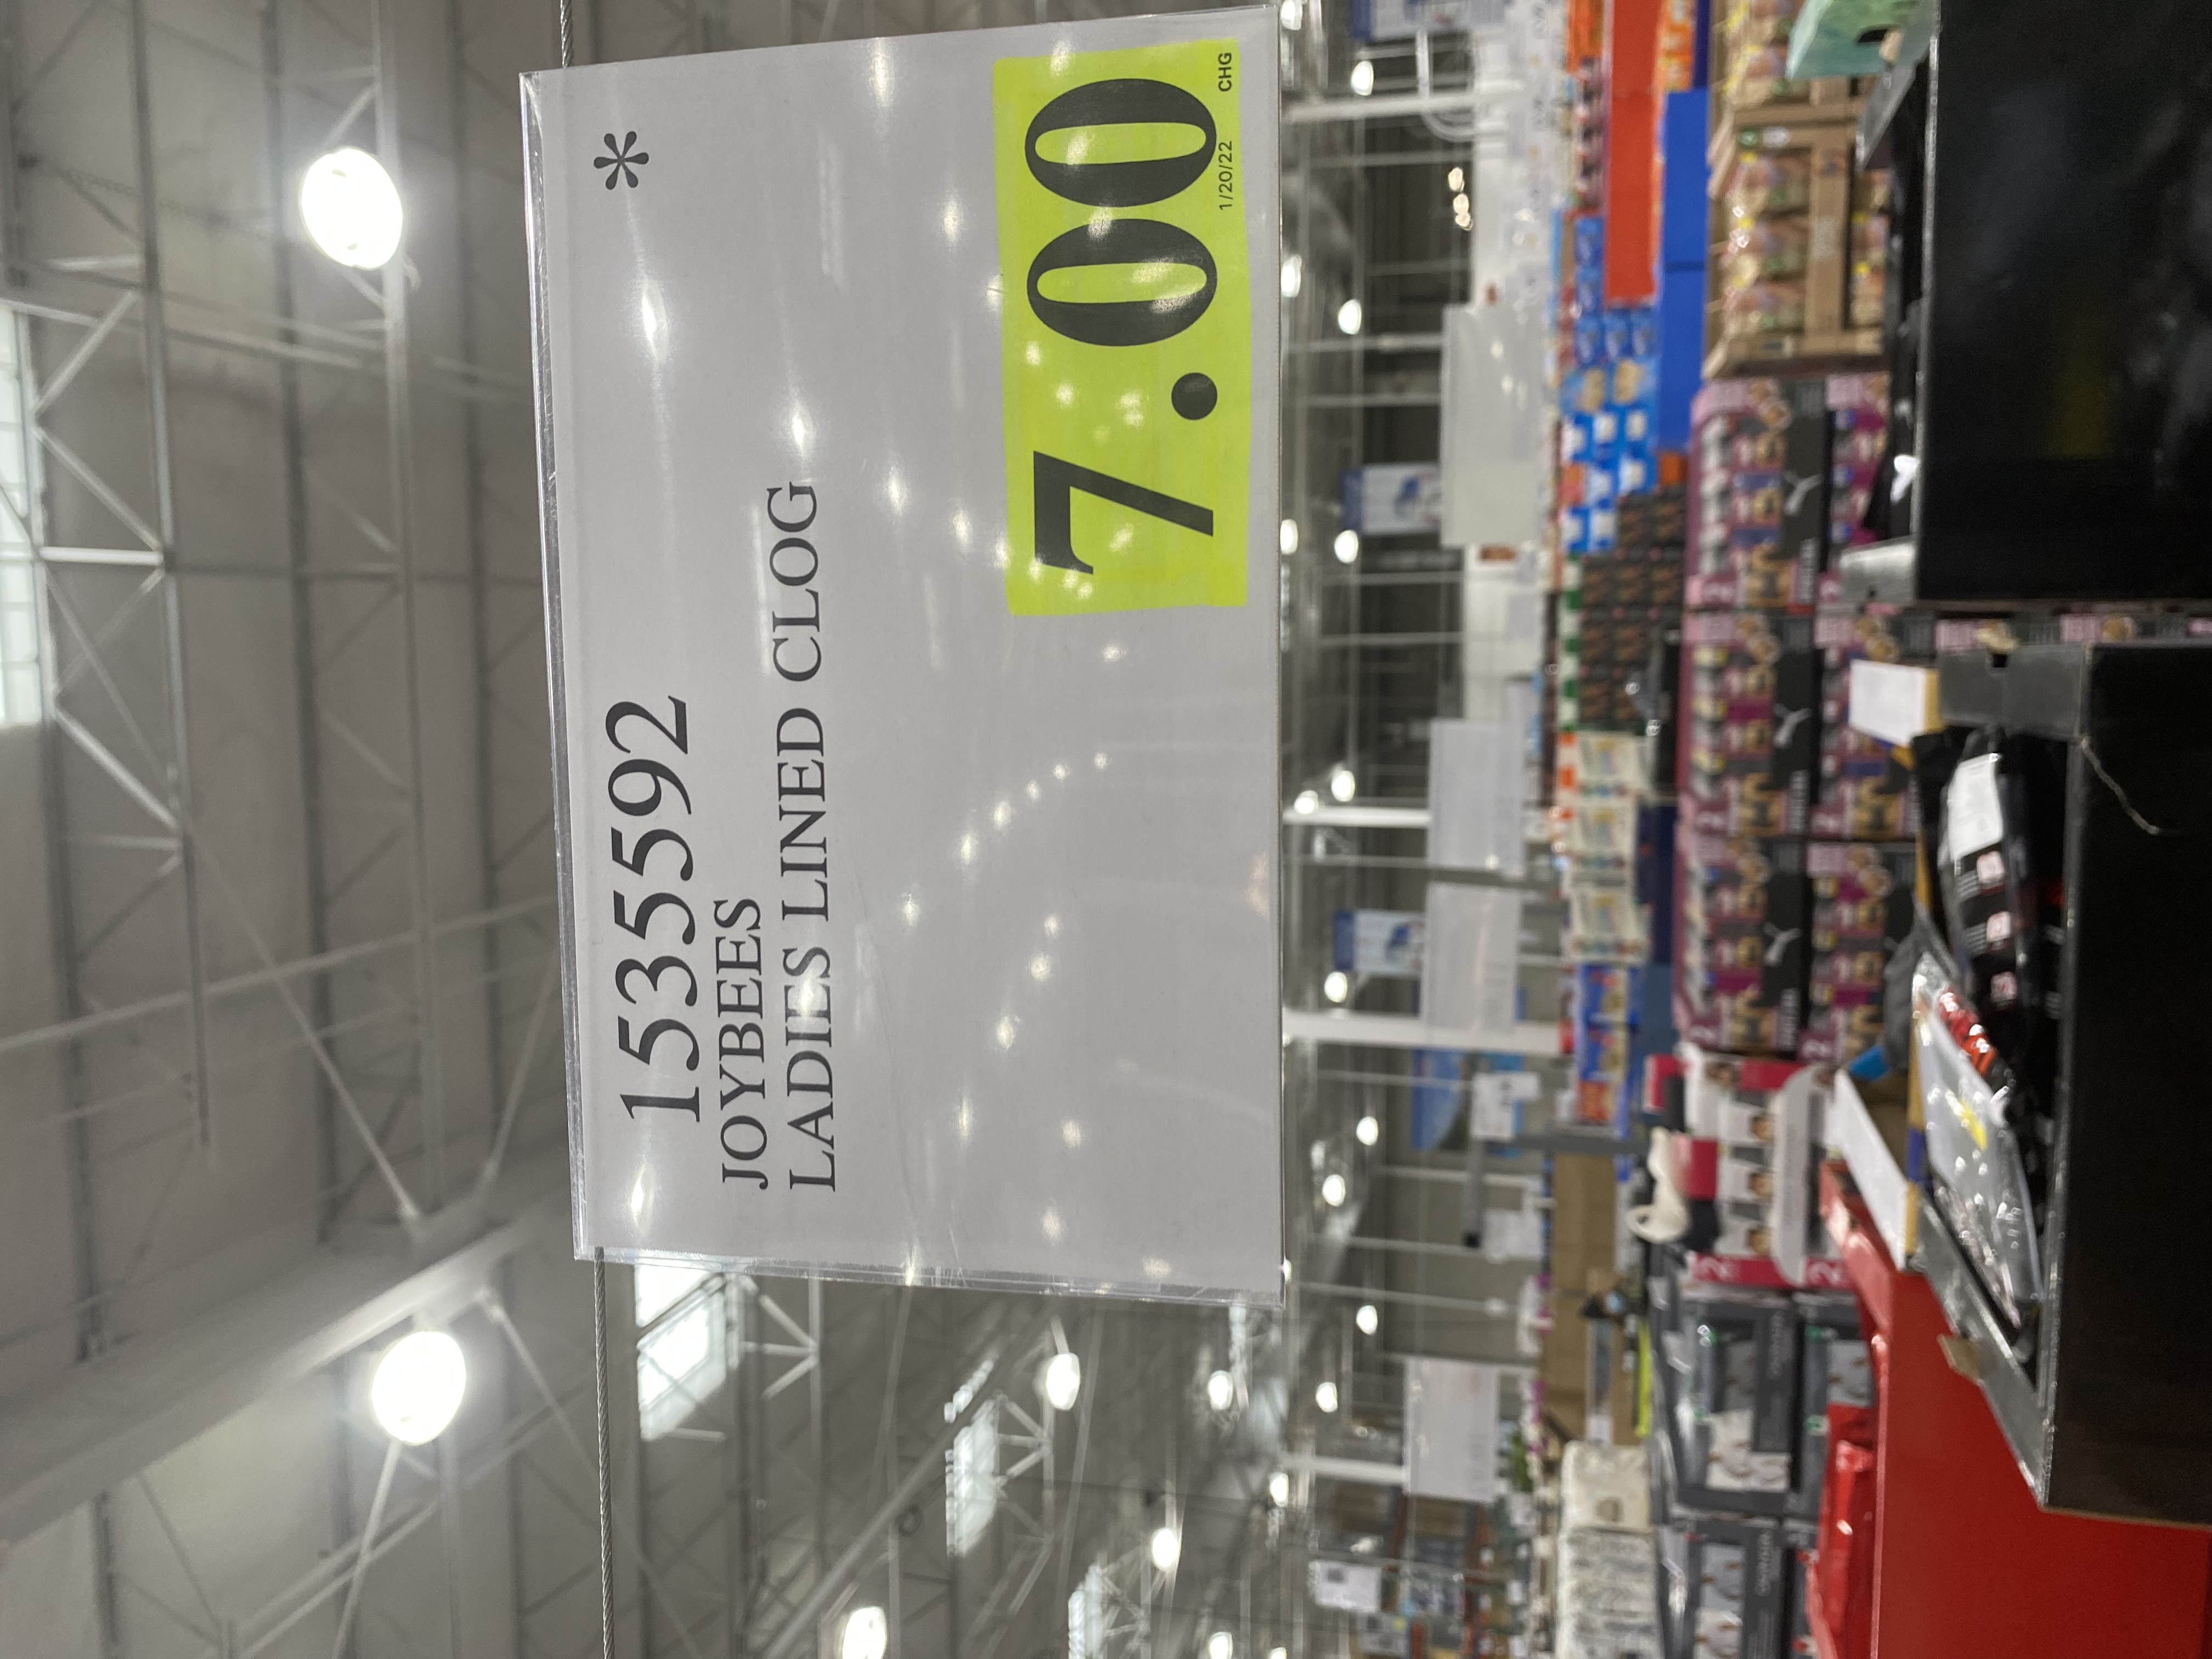 YMMV - Joybees Lined Clog - Costco - $7.00 in-store ($19.97 online)